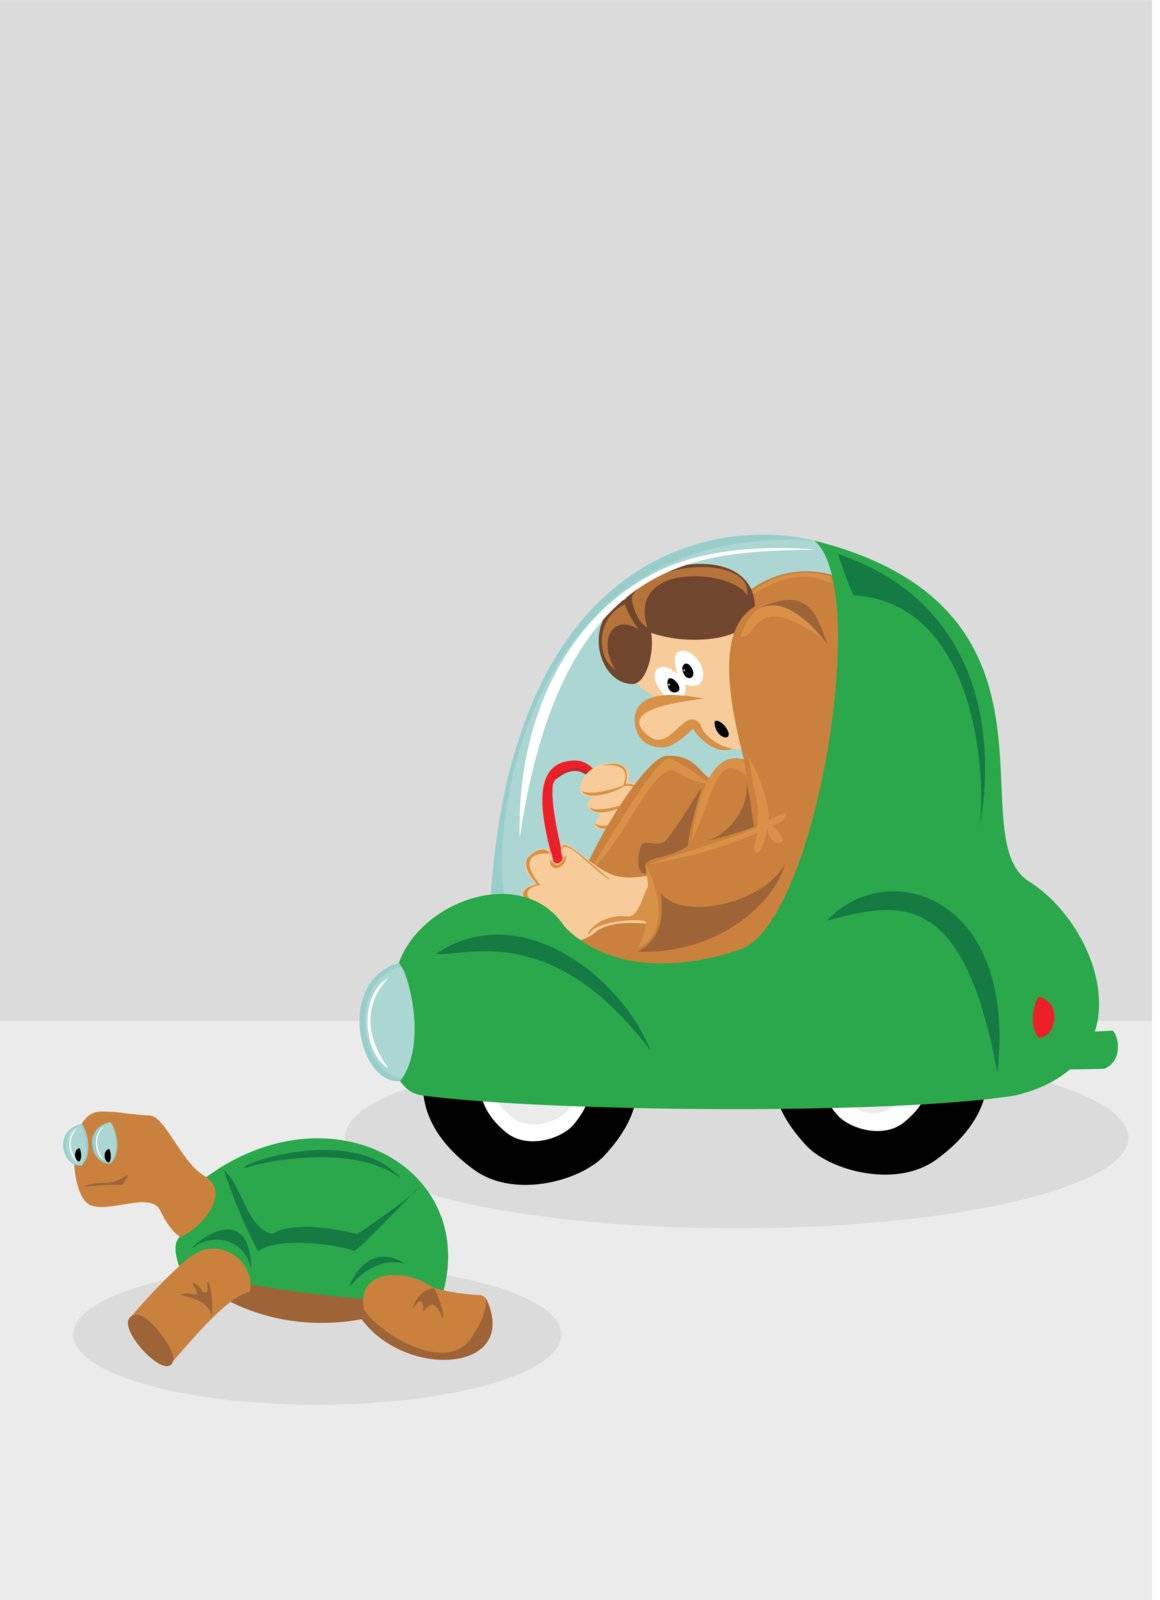 Tall man stuck in a small car is passed by a turtle faster than him